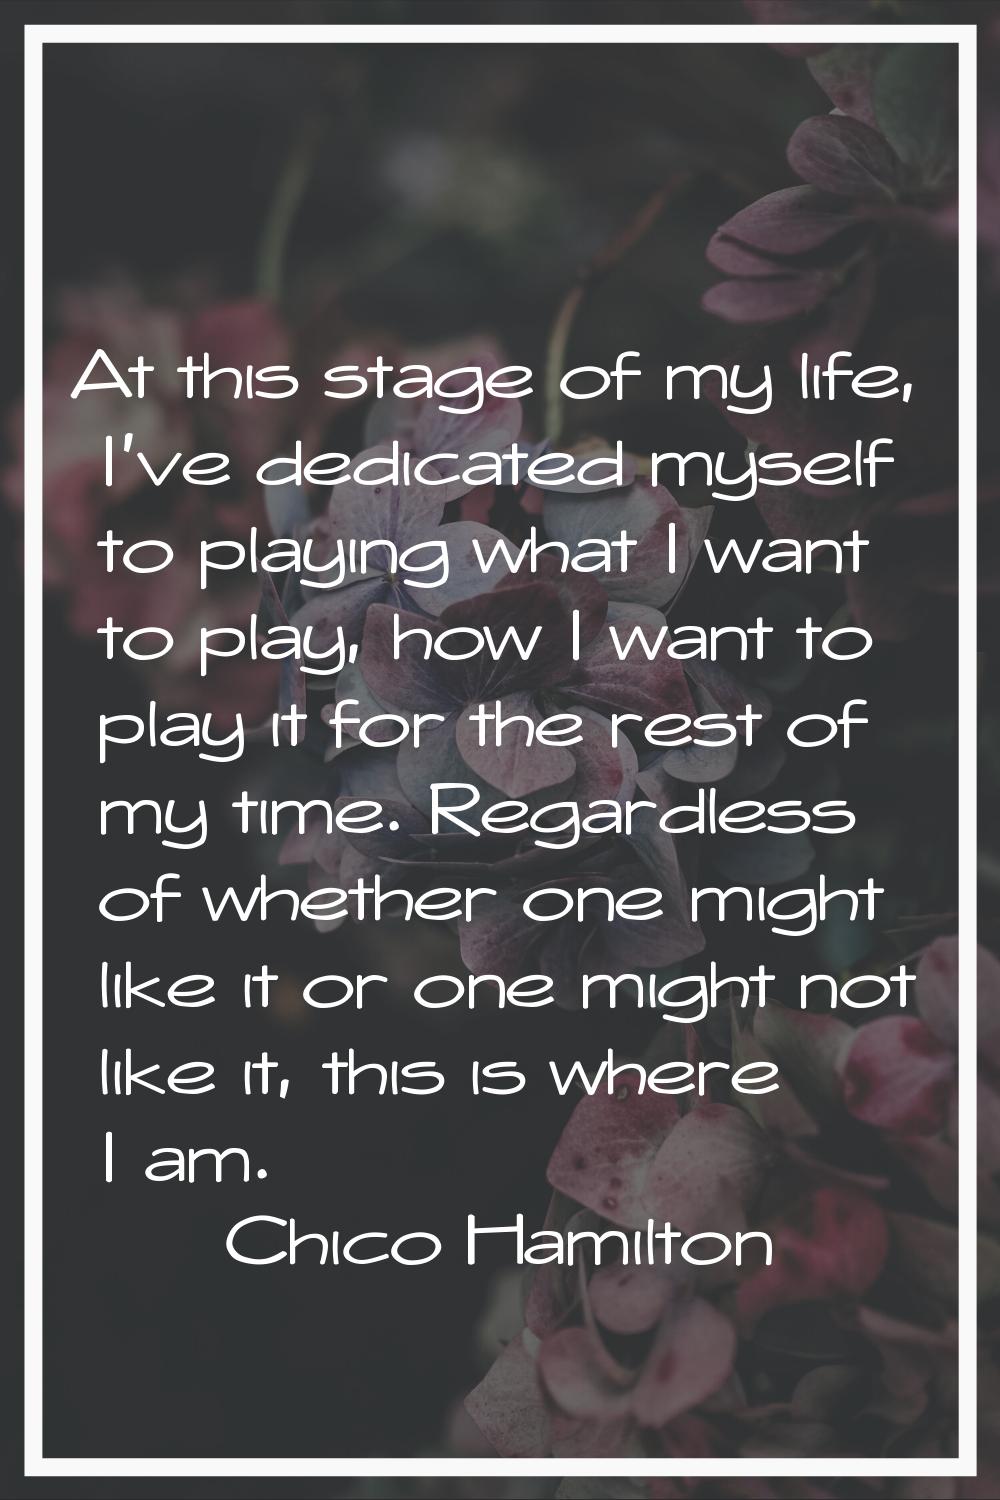 At this stage of my life, I've dedicated myself to playing what I want to play, how I want to play 